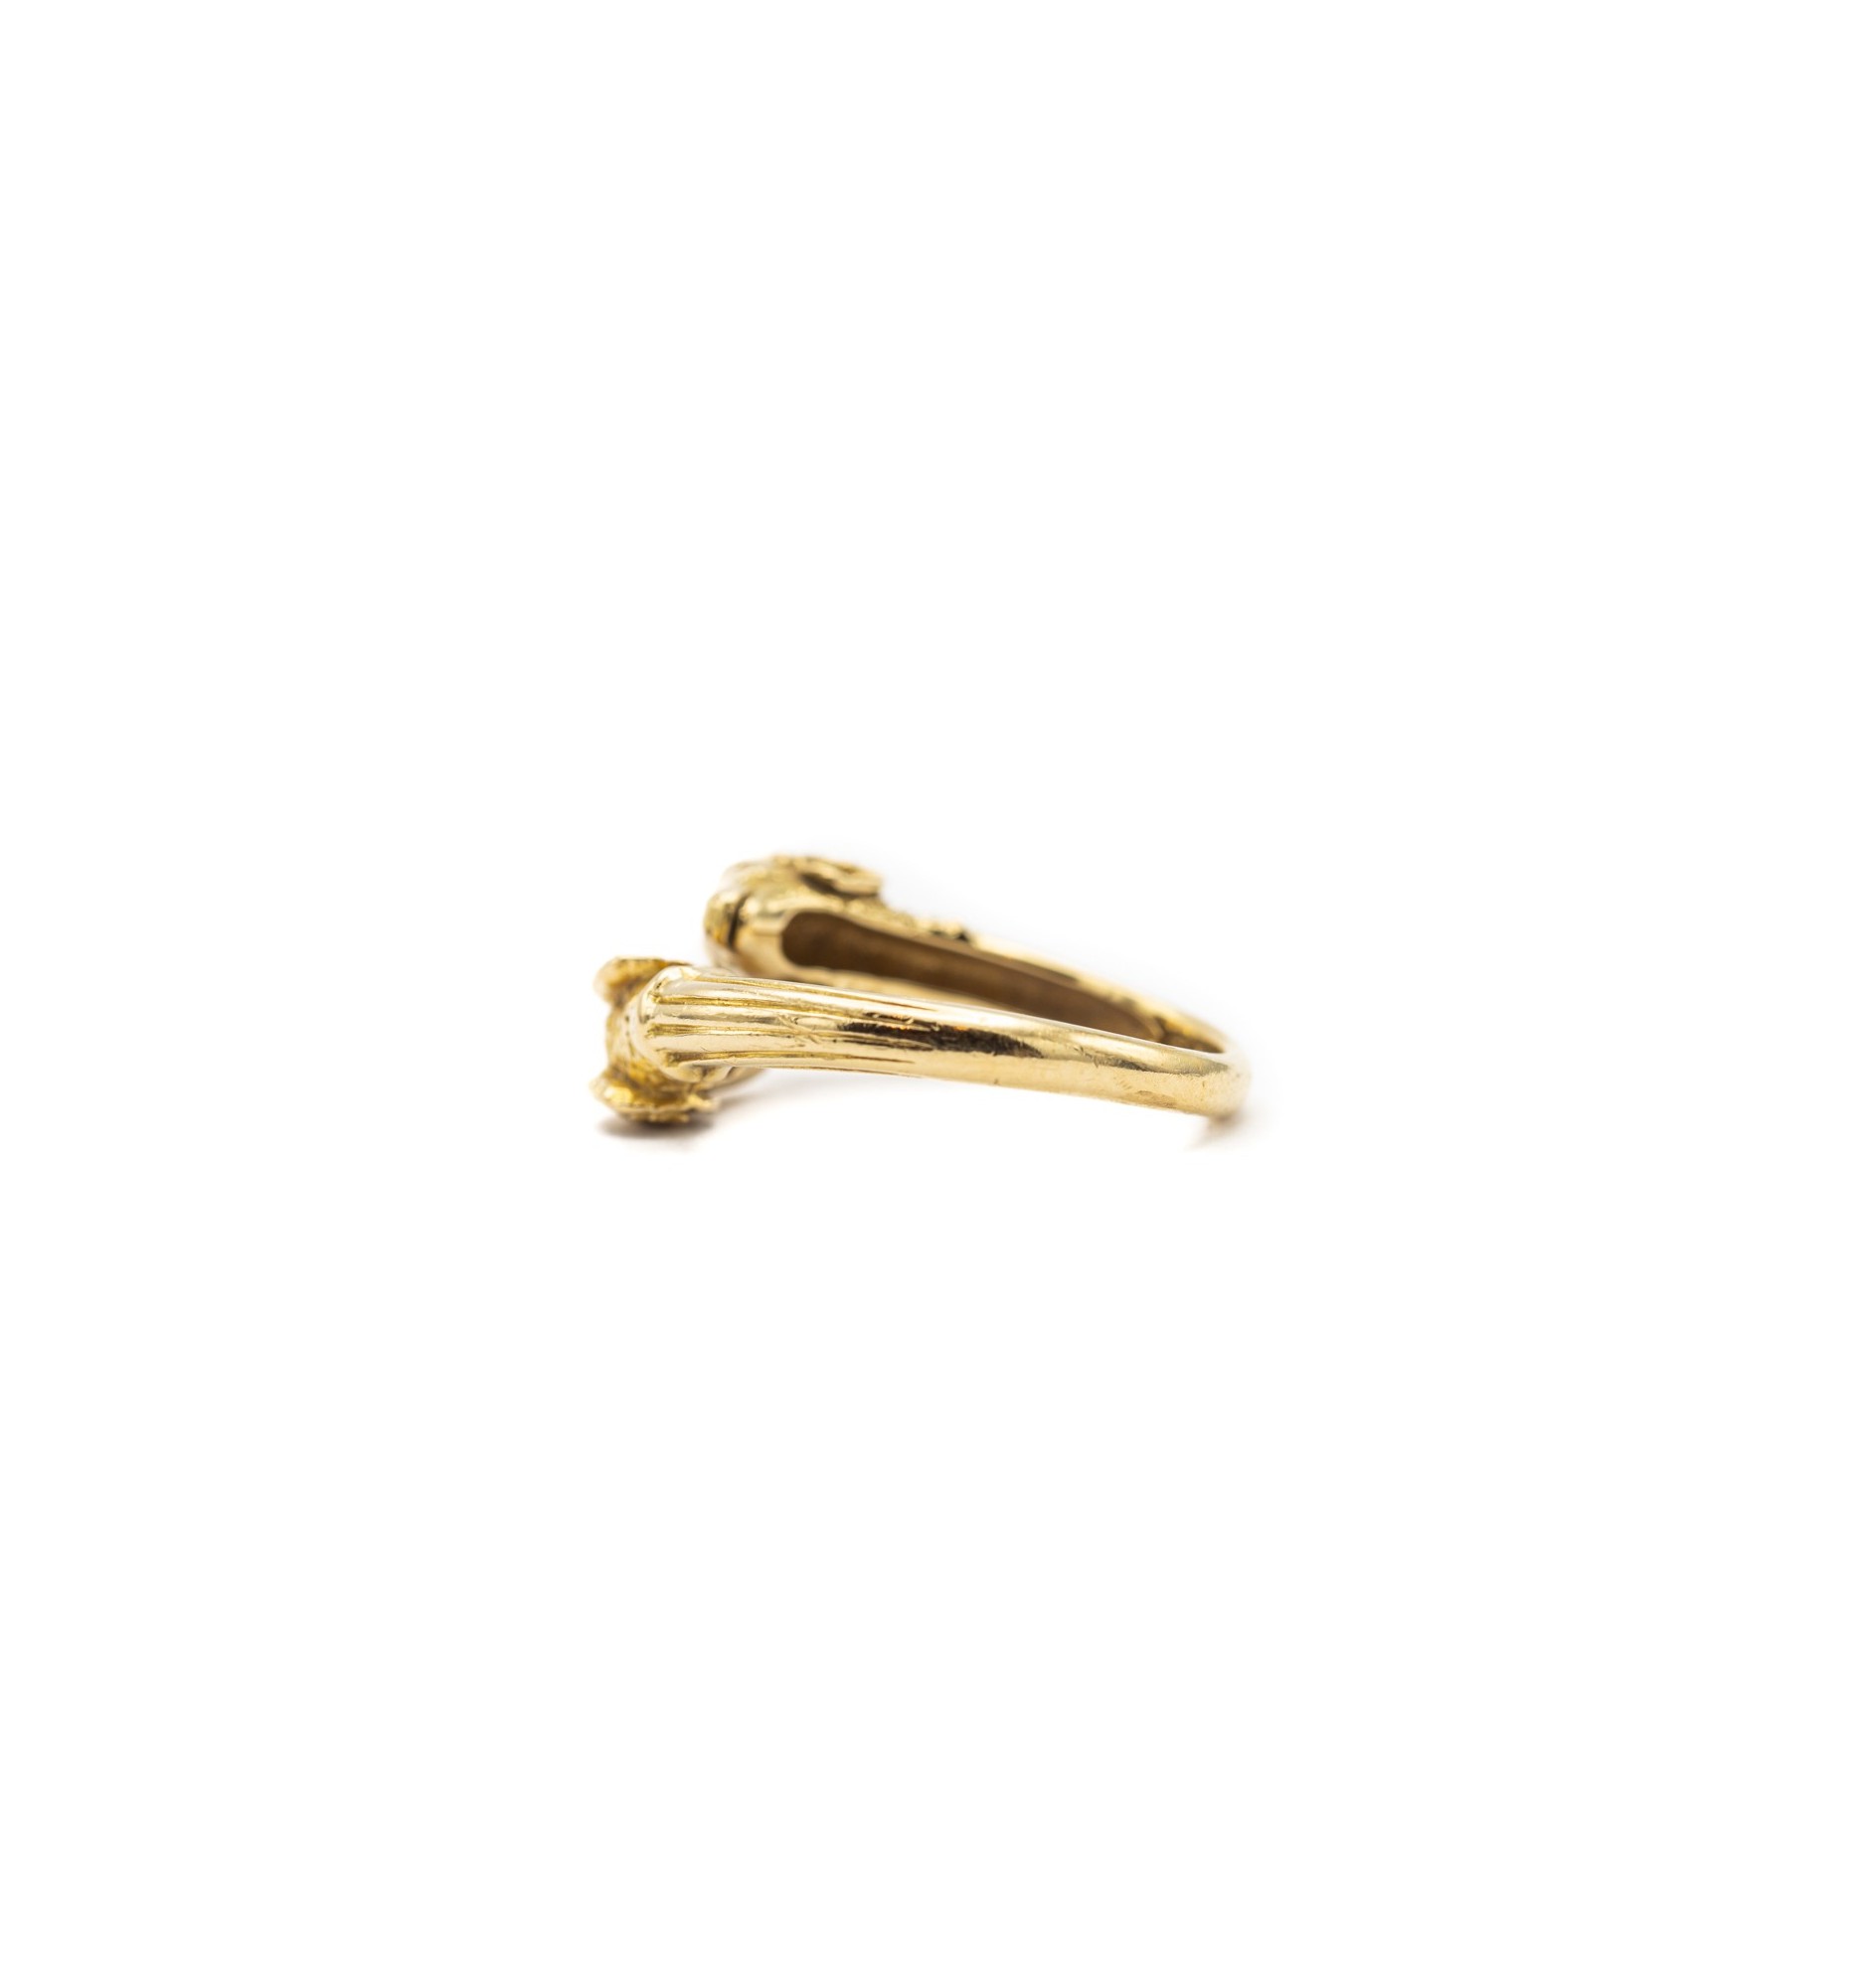 Rani - Ram head ring crafted in 18ct yellow gold